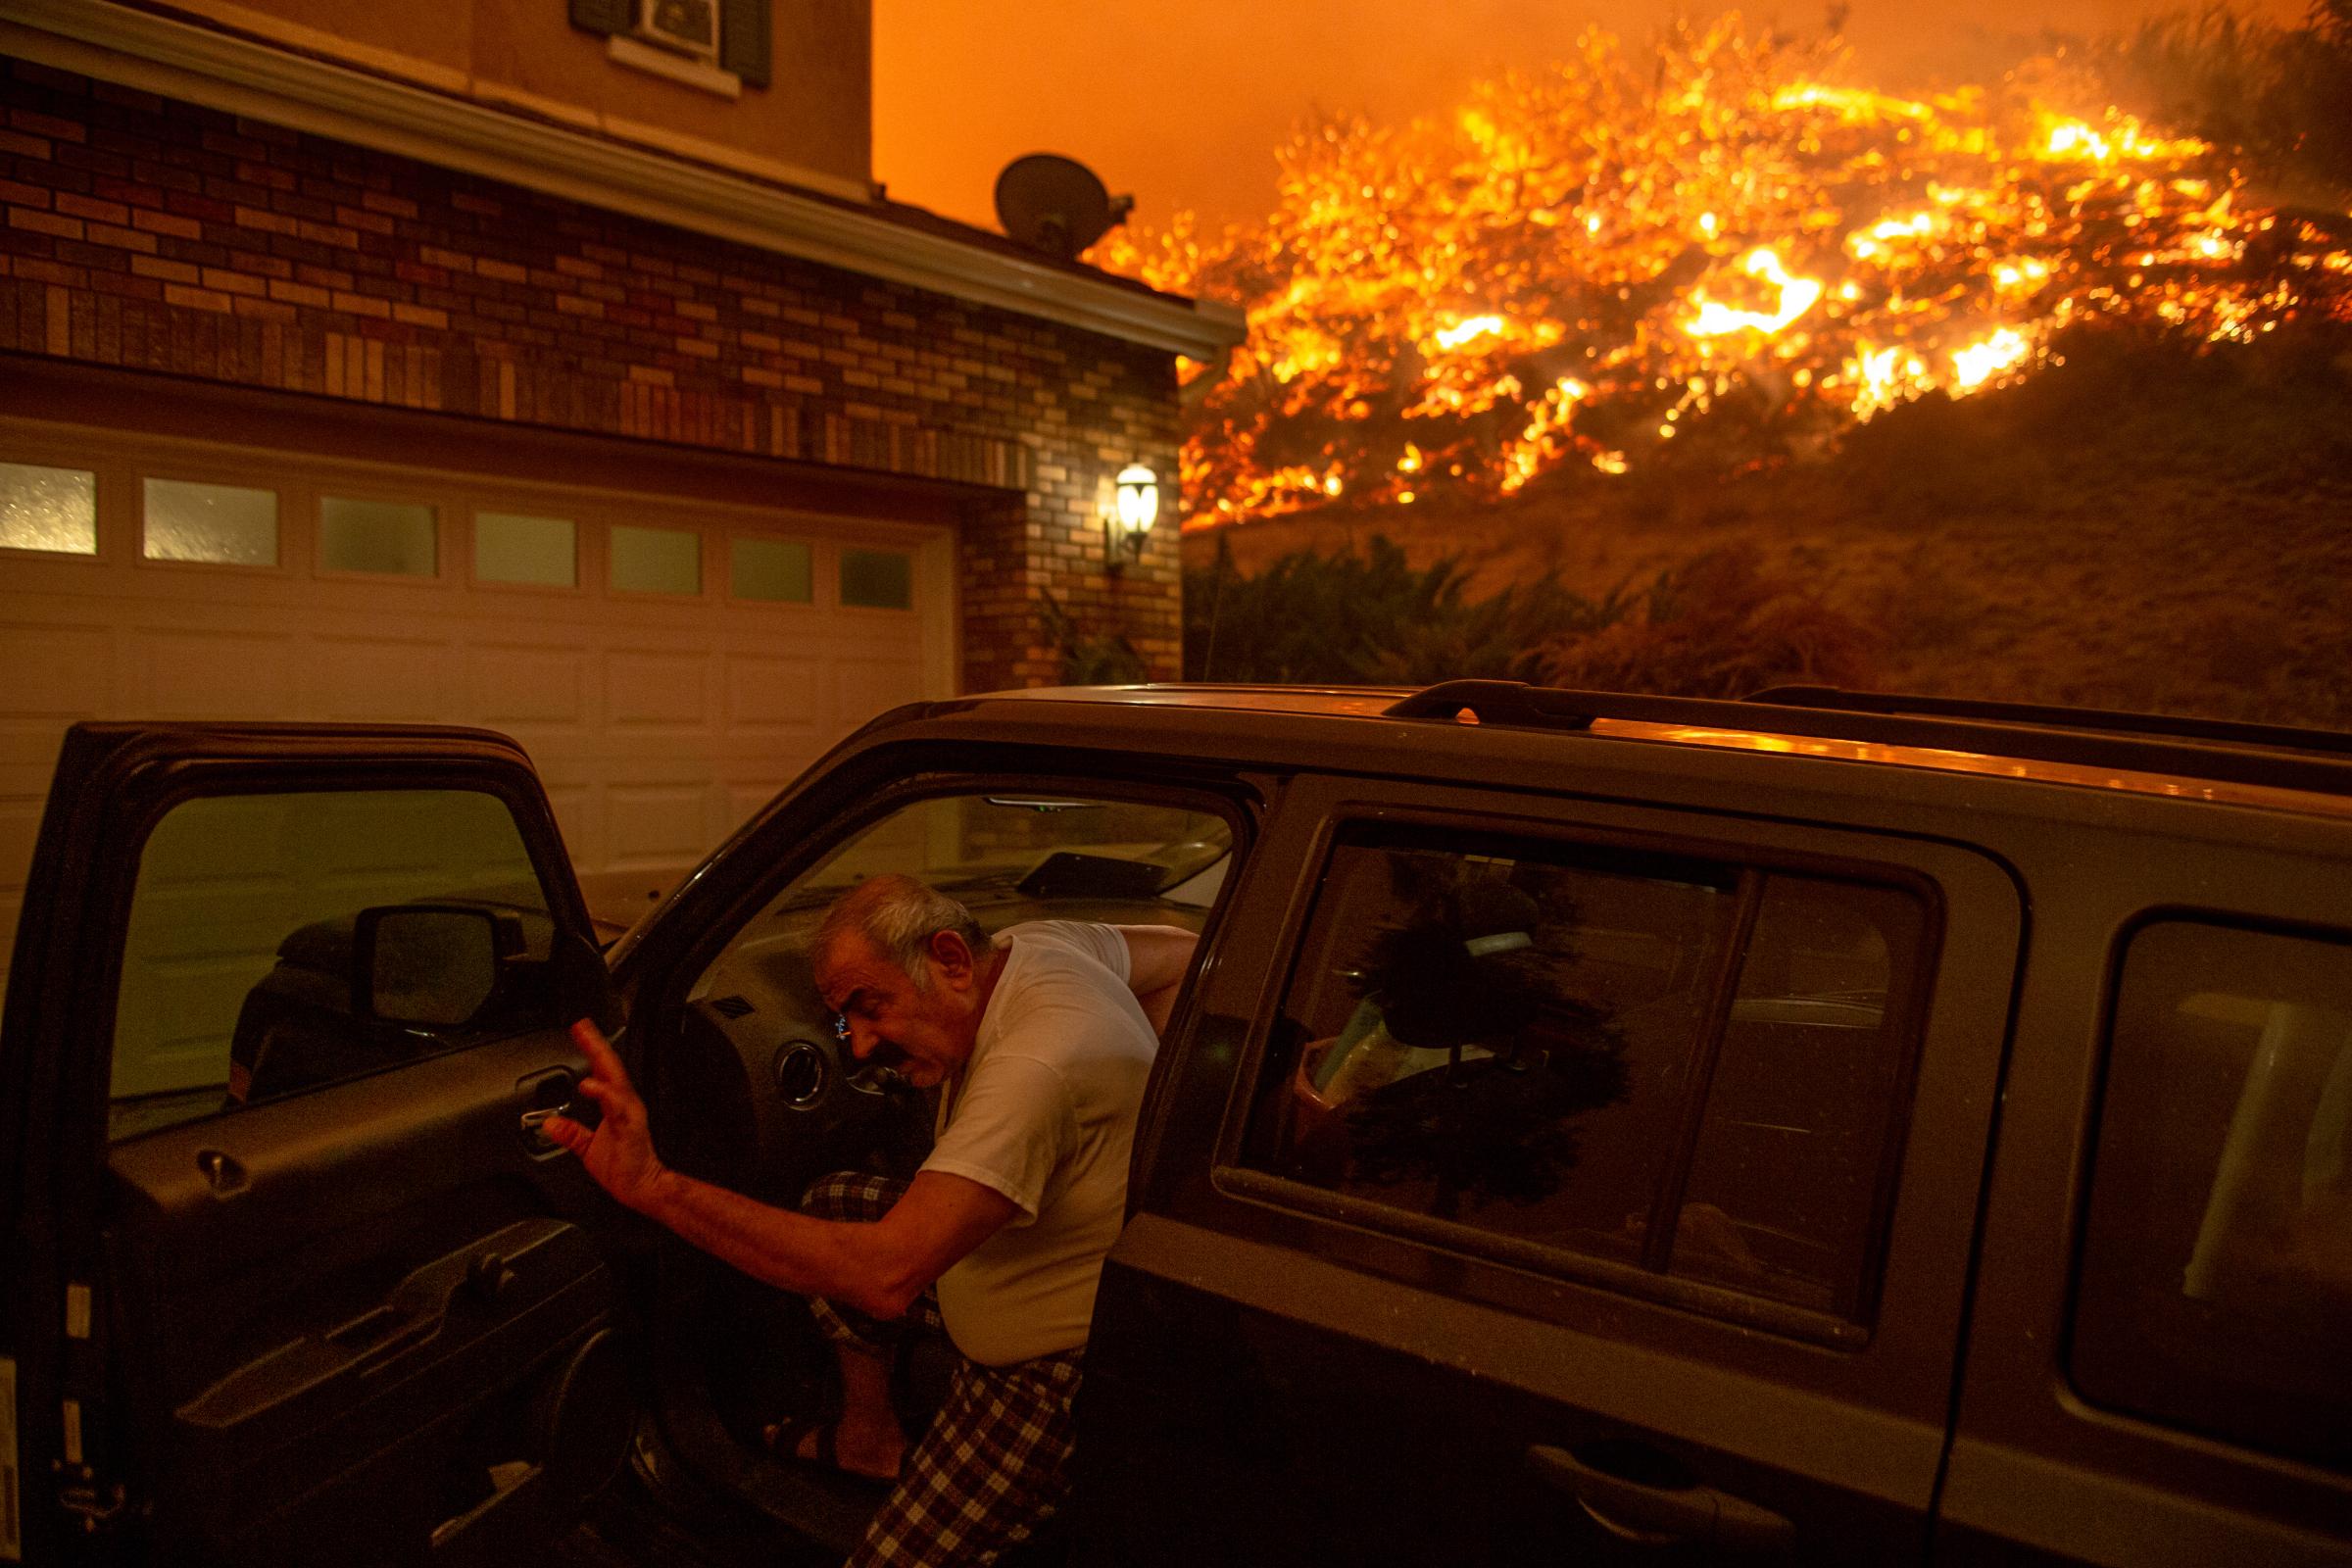 - ON ASSIGNMENT - The state of California faced its worst fire season in...